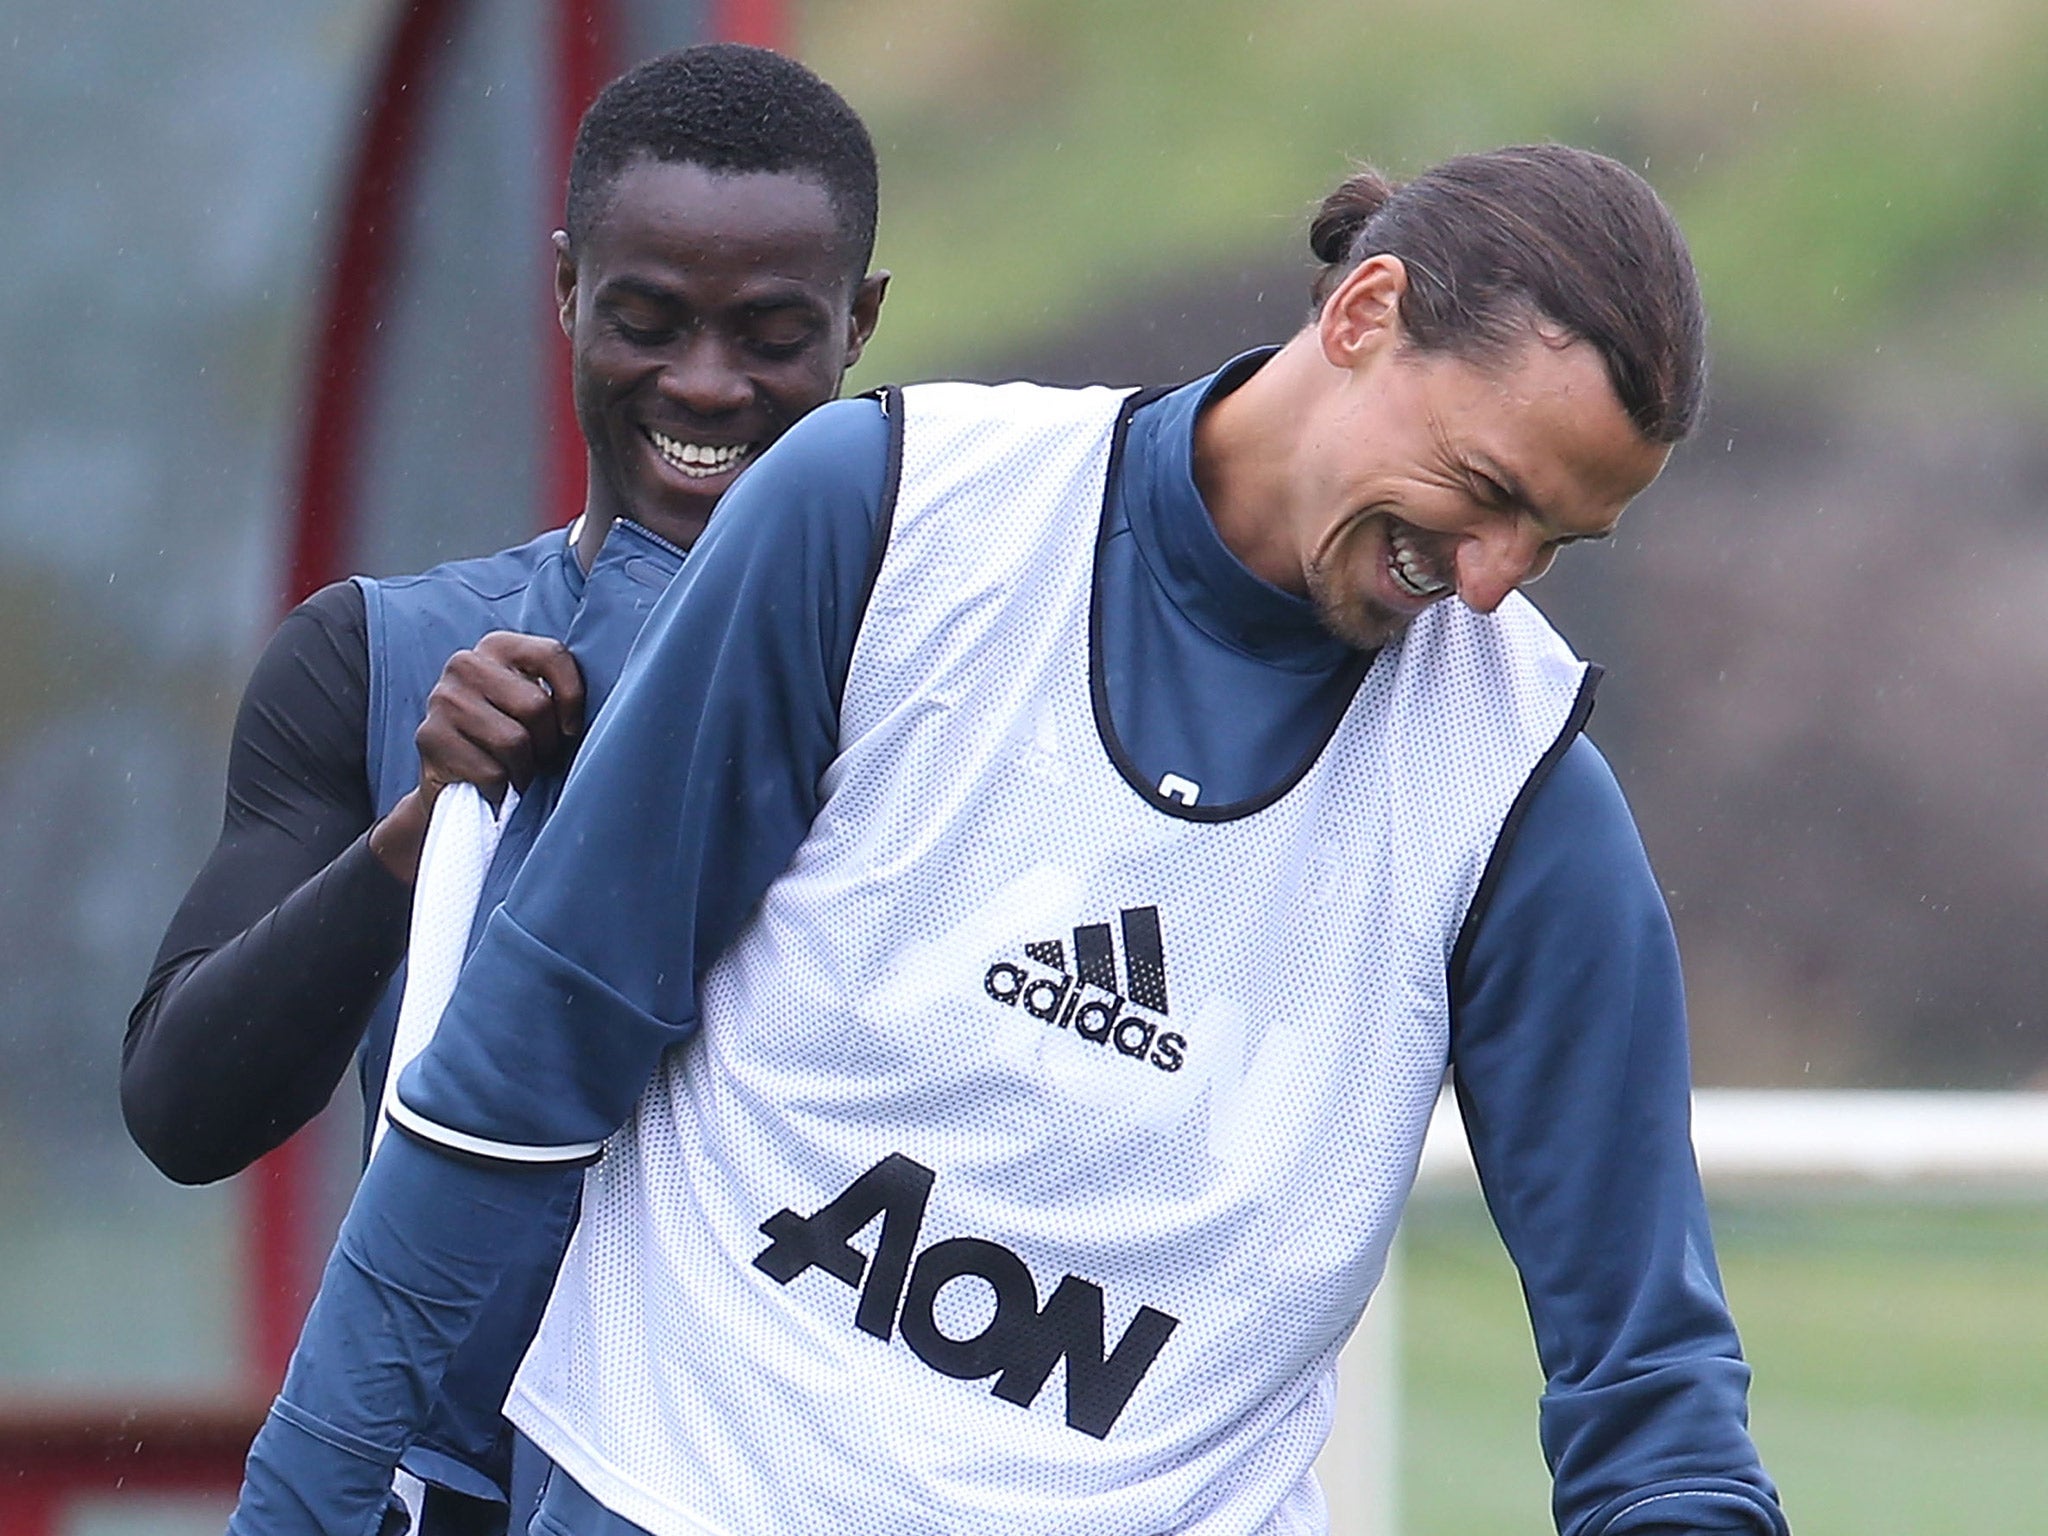 Zlatan Ibrahimovic is poised to make his debut for Manchester United against Galatasaray